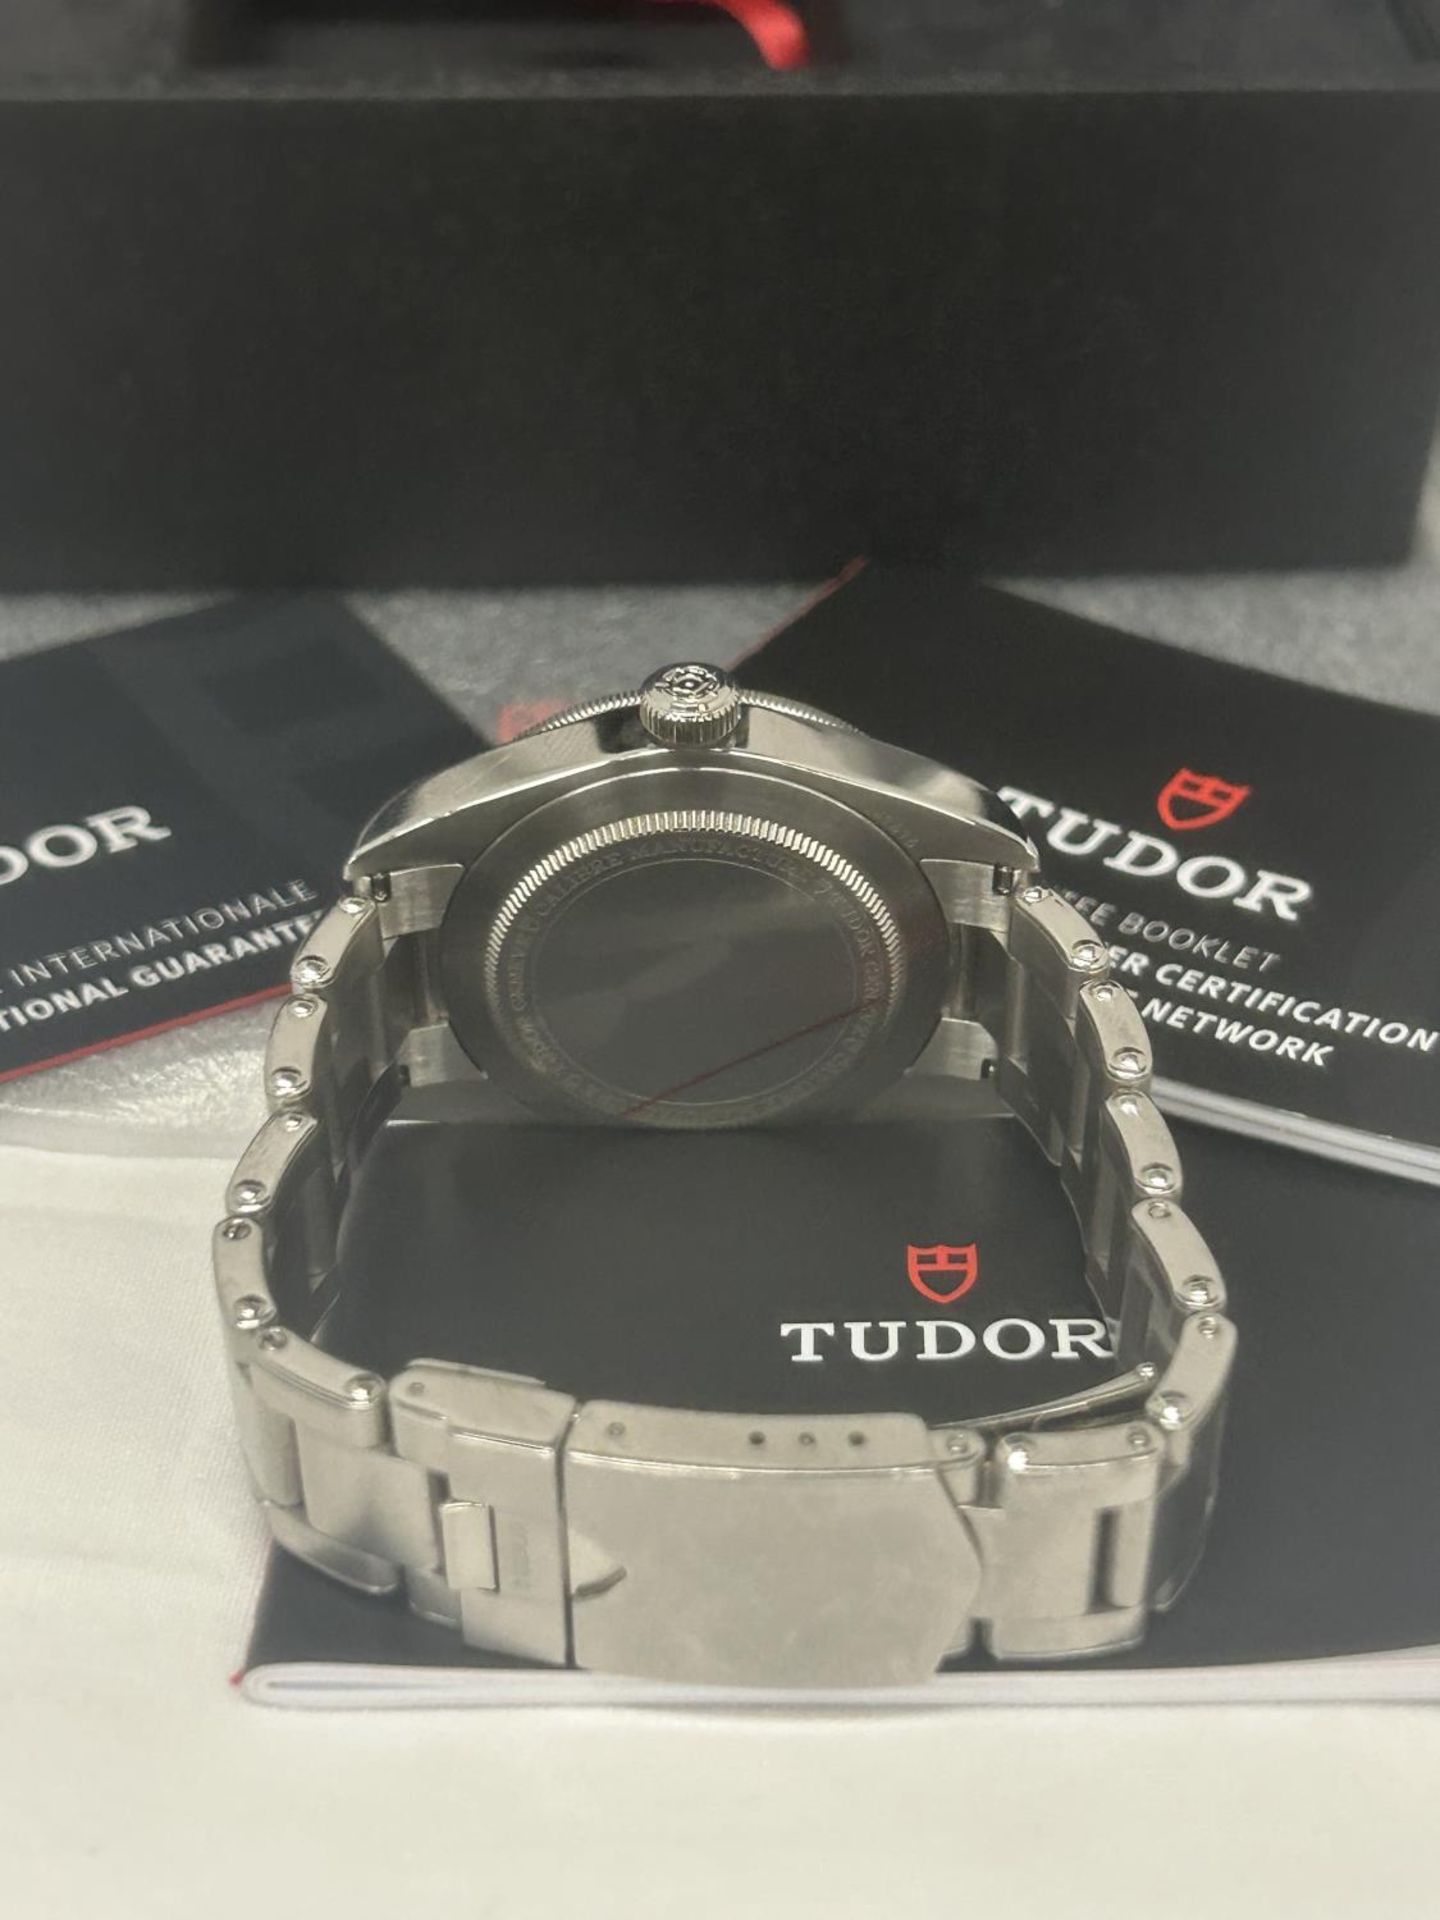 A TUDOR BLACK BAY 58 CHRONOGRAPH AUTOMATIC WATCH WITH 39MM BLACK DIAL, COMPLETE WITH ORIGINAL BOX - Image 5 of 7